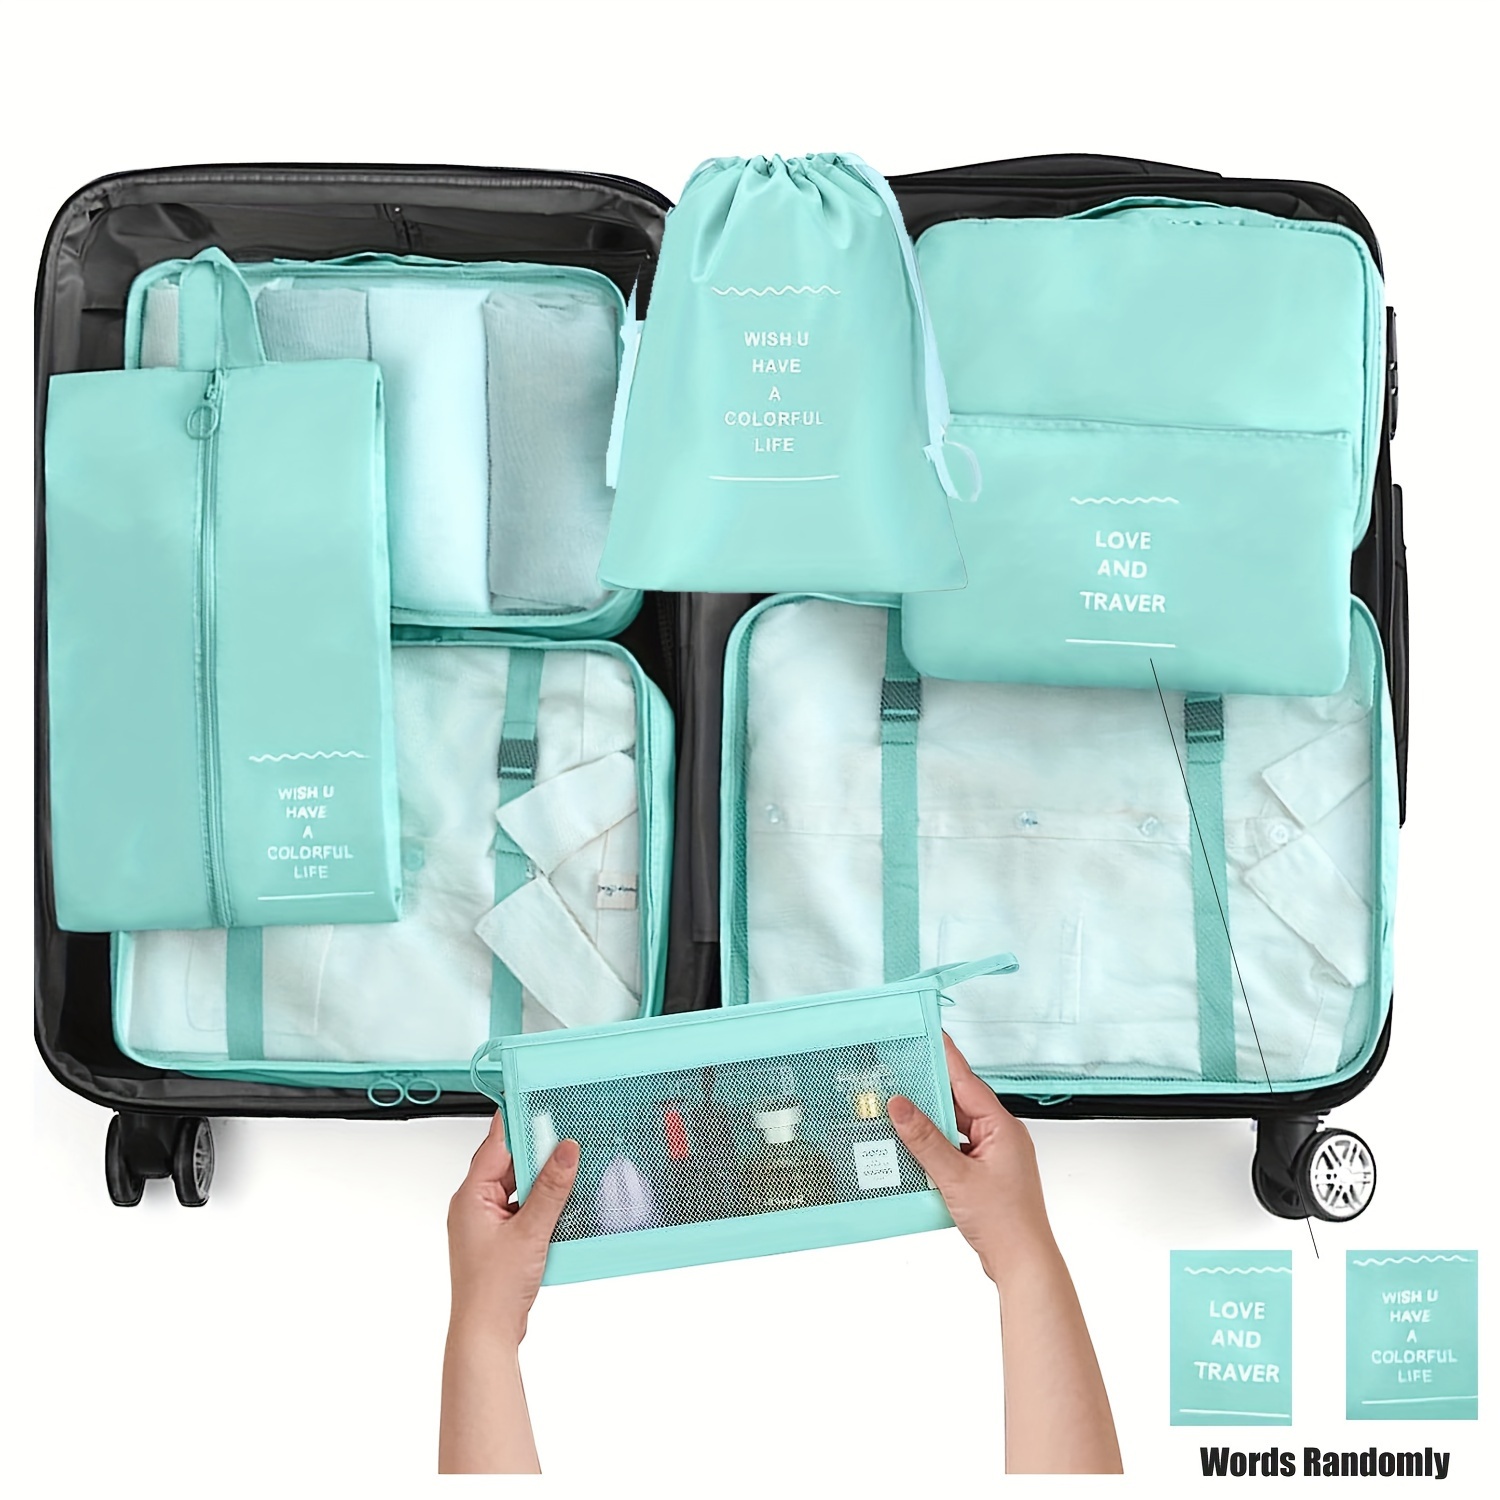 8pcs Travel Organiser Packing Bags Travel Packing Cubes Set for Clothes  Travel Luggage Organizers Storage Bags 